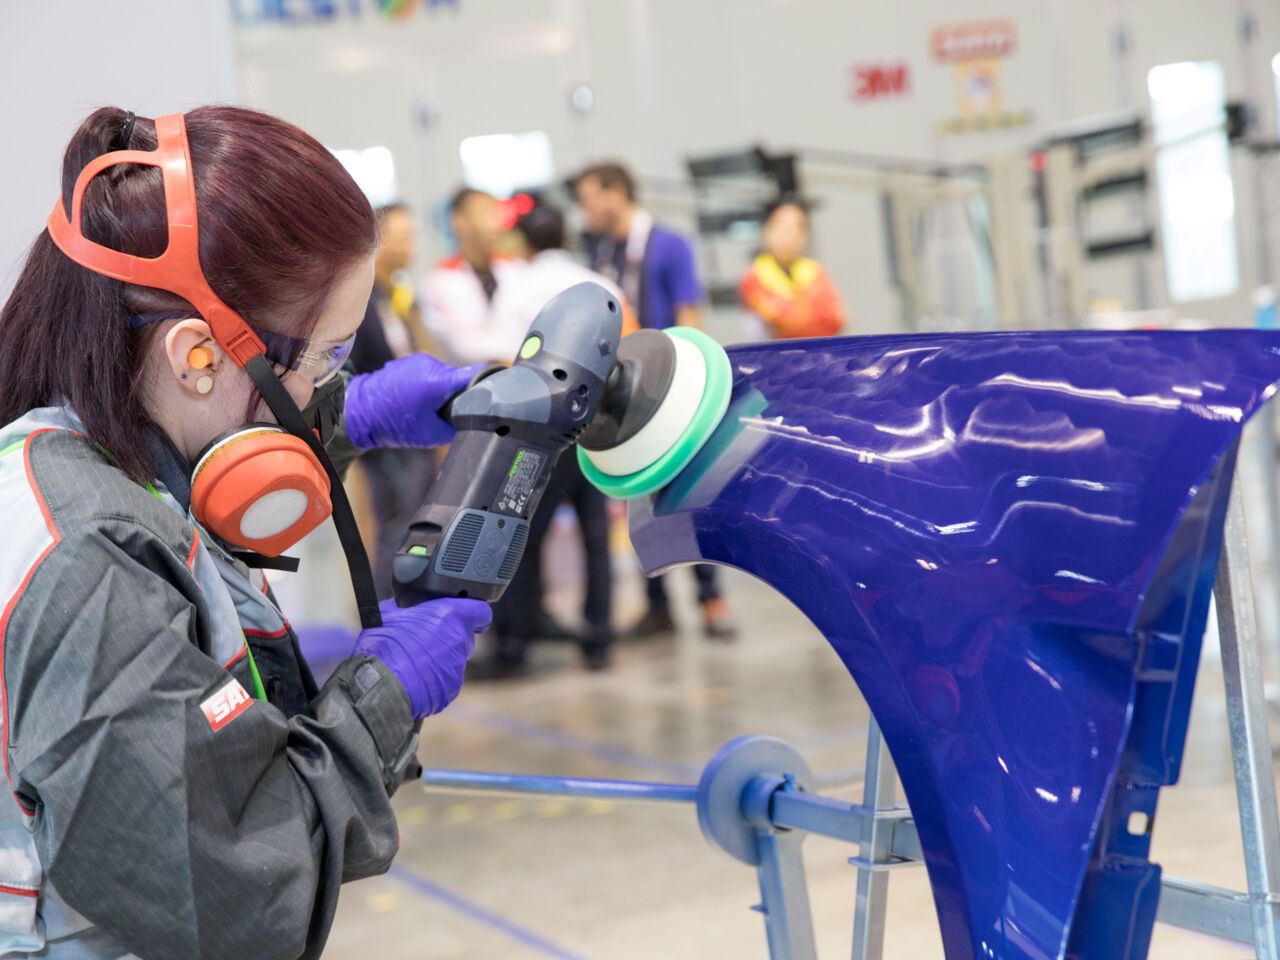 BASF signs a new multi-year Global Industry Partnership with WorldSkills